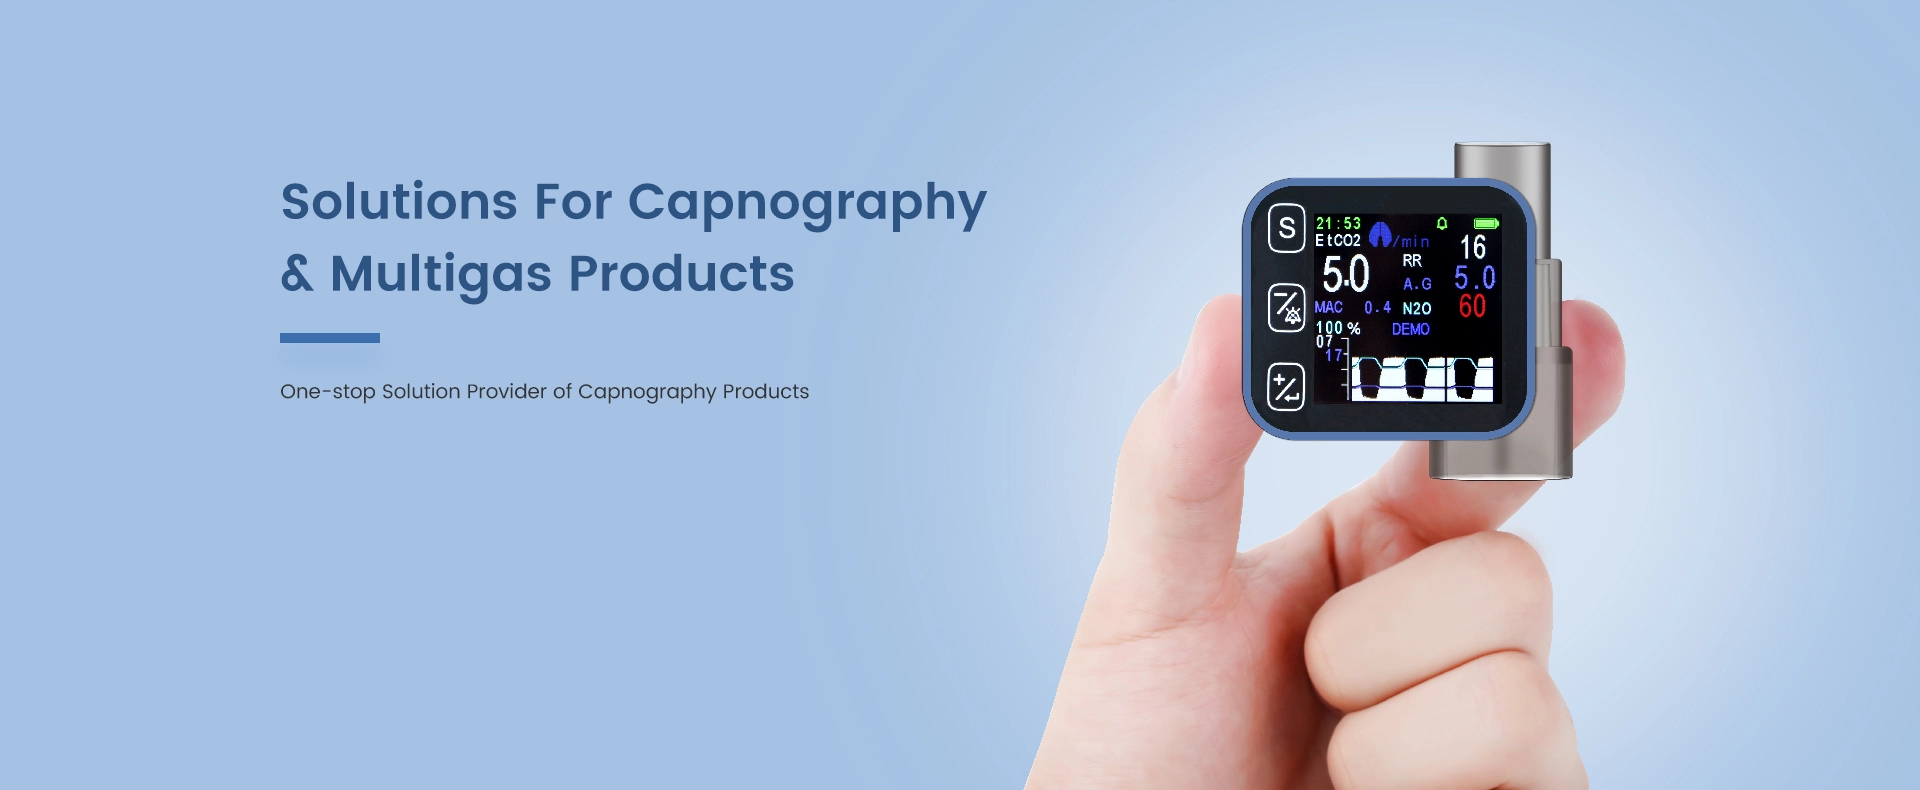 Solutions For Capnography & Multigas Products